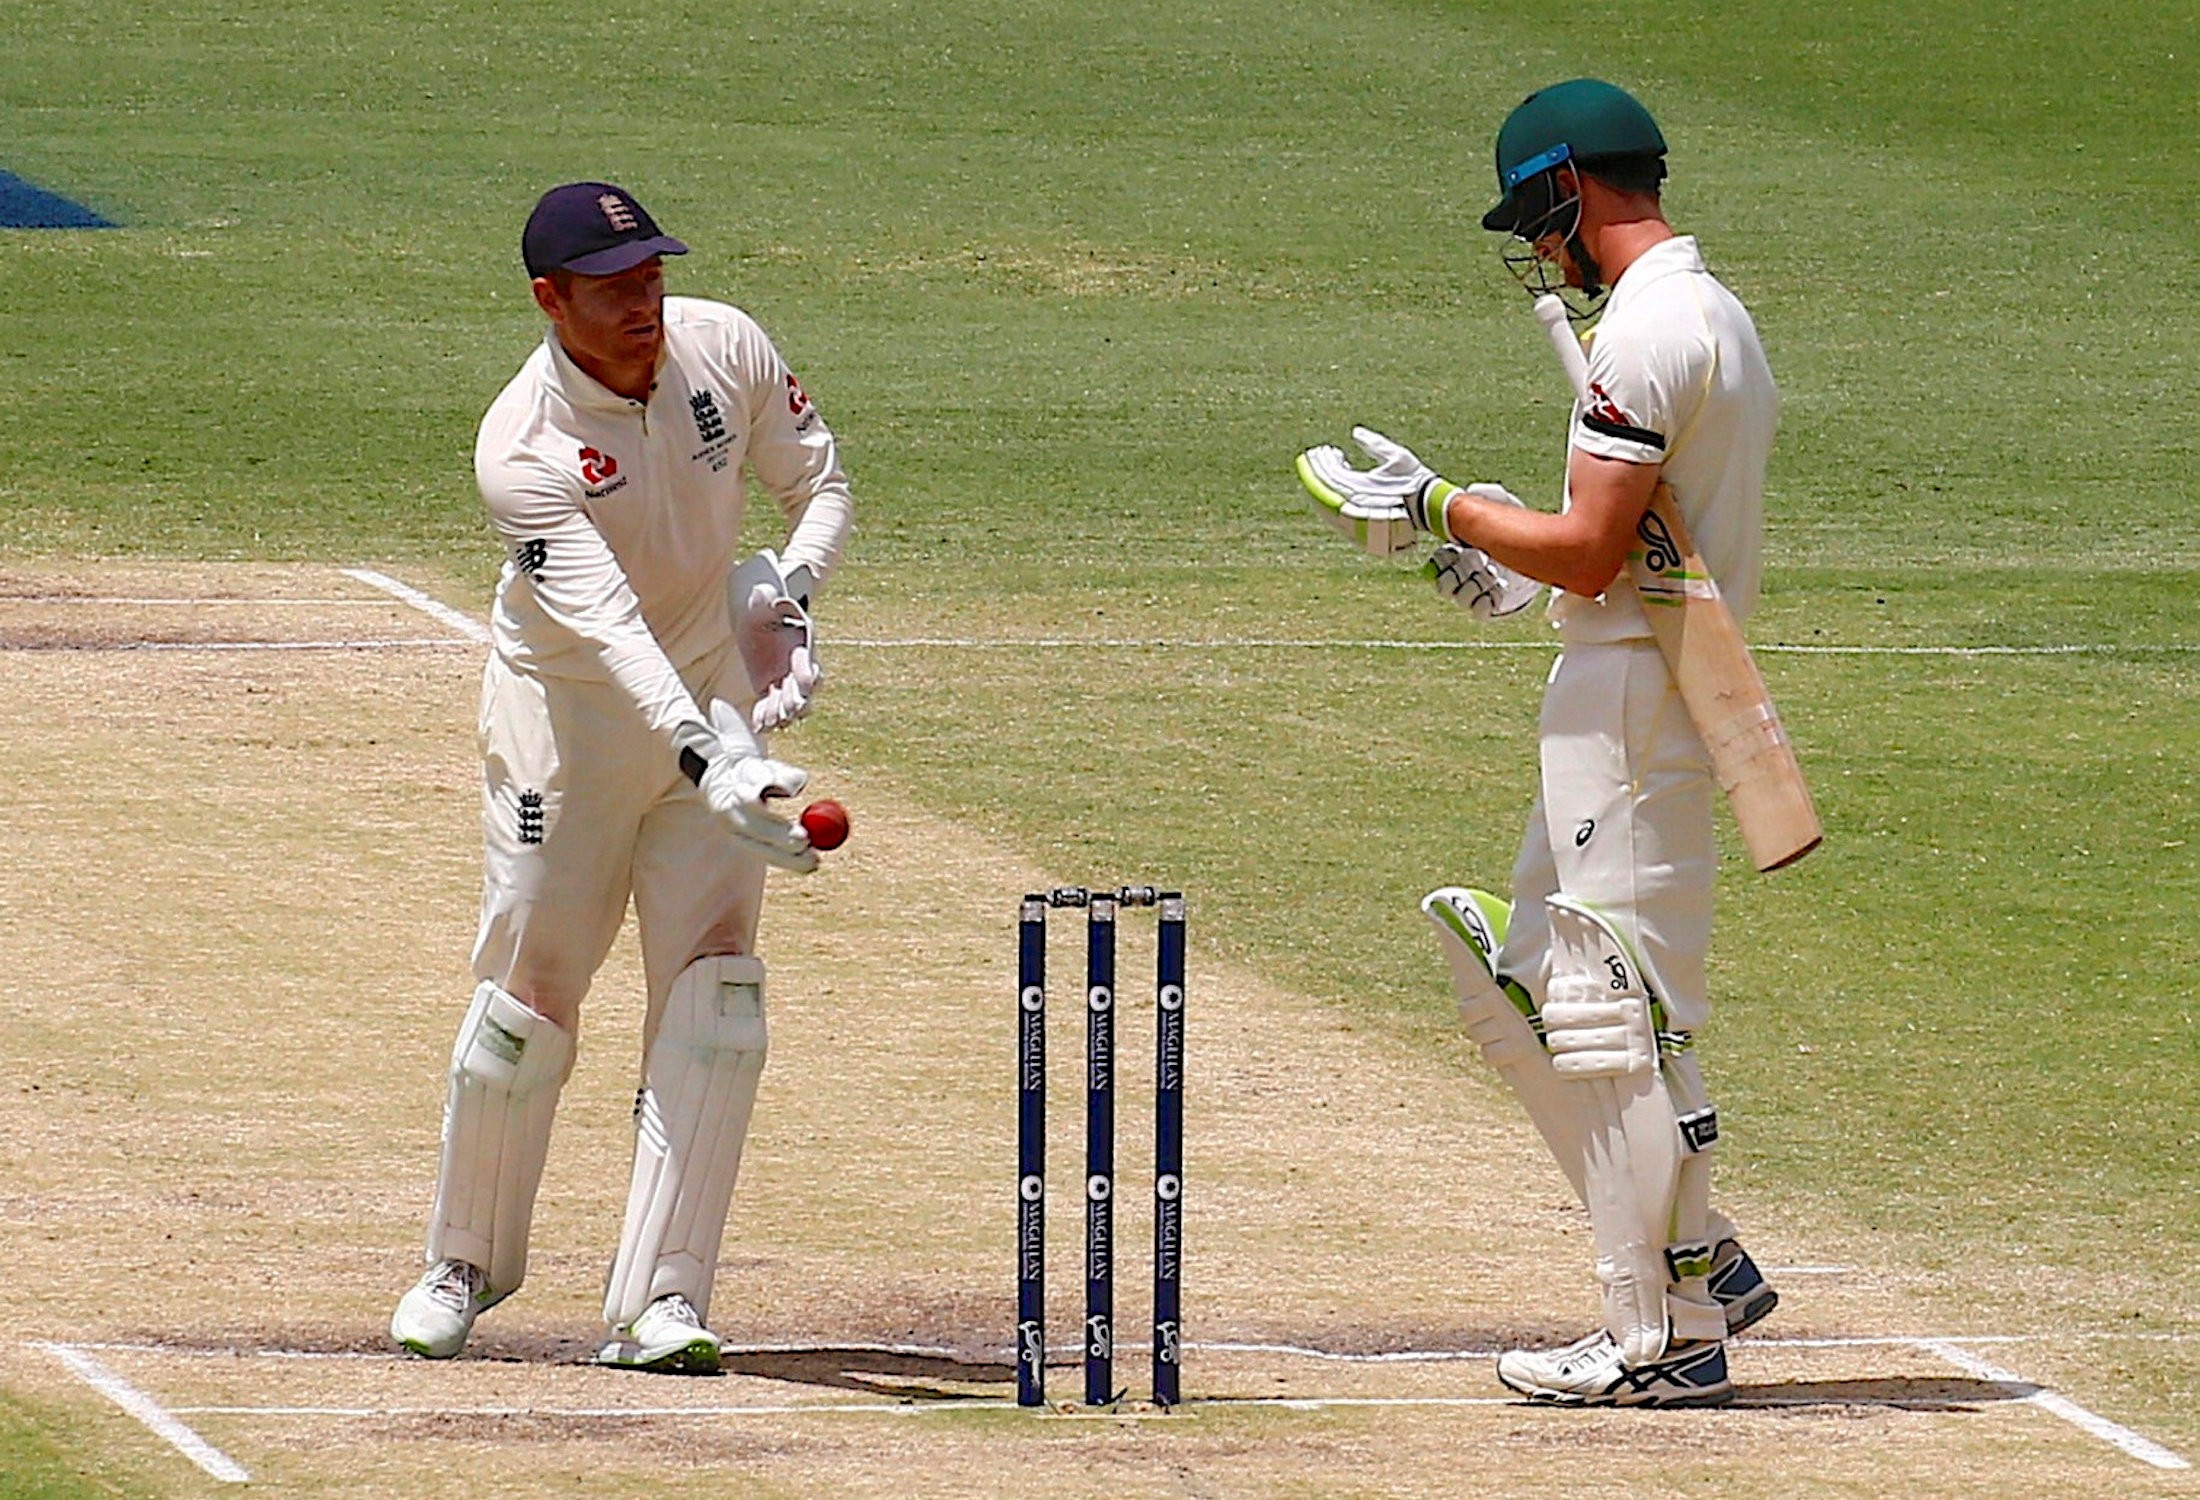 England wicketkeeper Jonny Bairstow comes face-to-face with Australia’s Cameron Bancroft who he is alleged to have headbutted a few weeks ago at a bar in Perth. Photo: Reuters